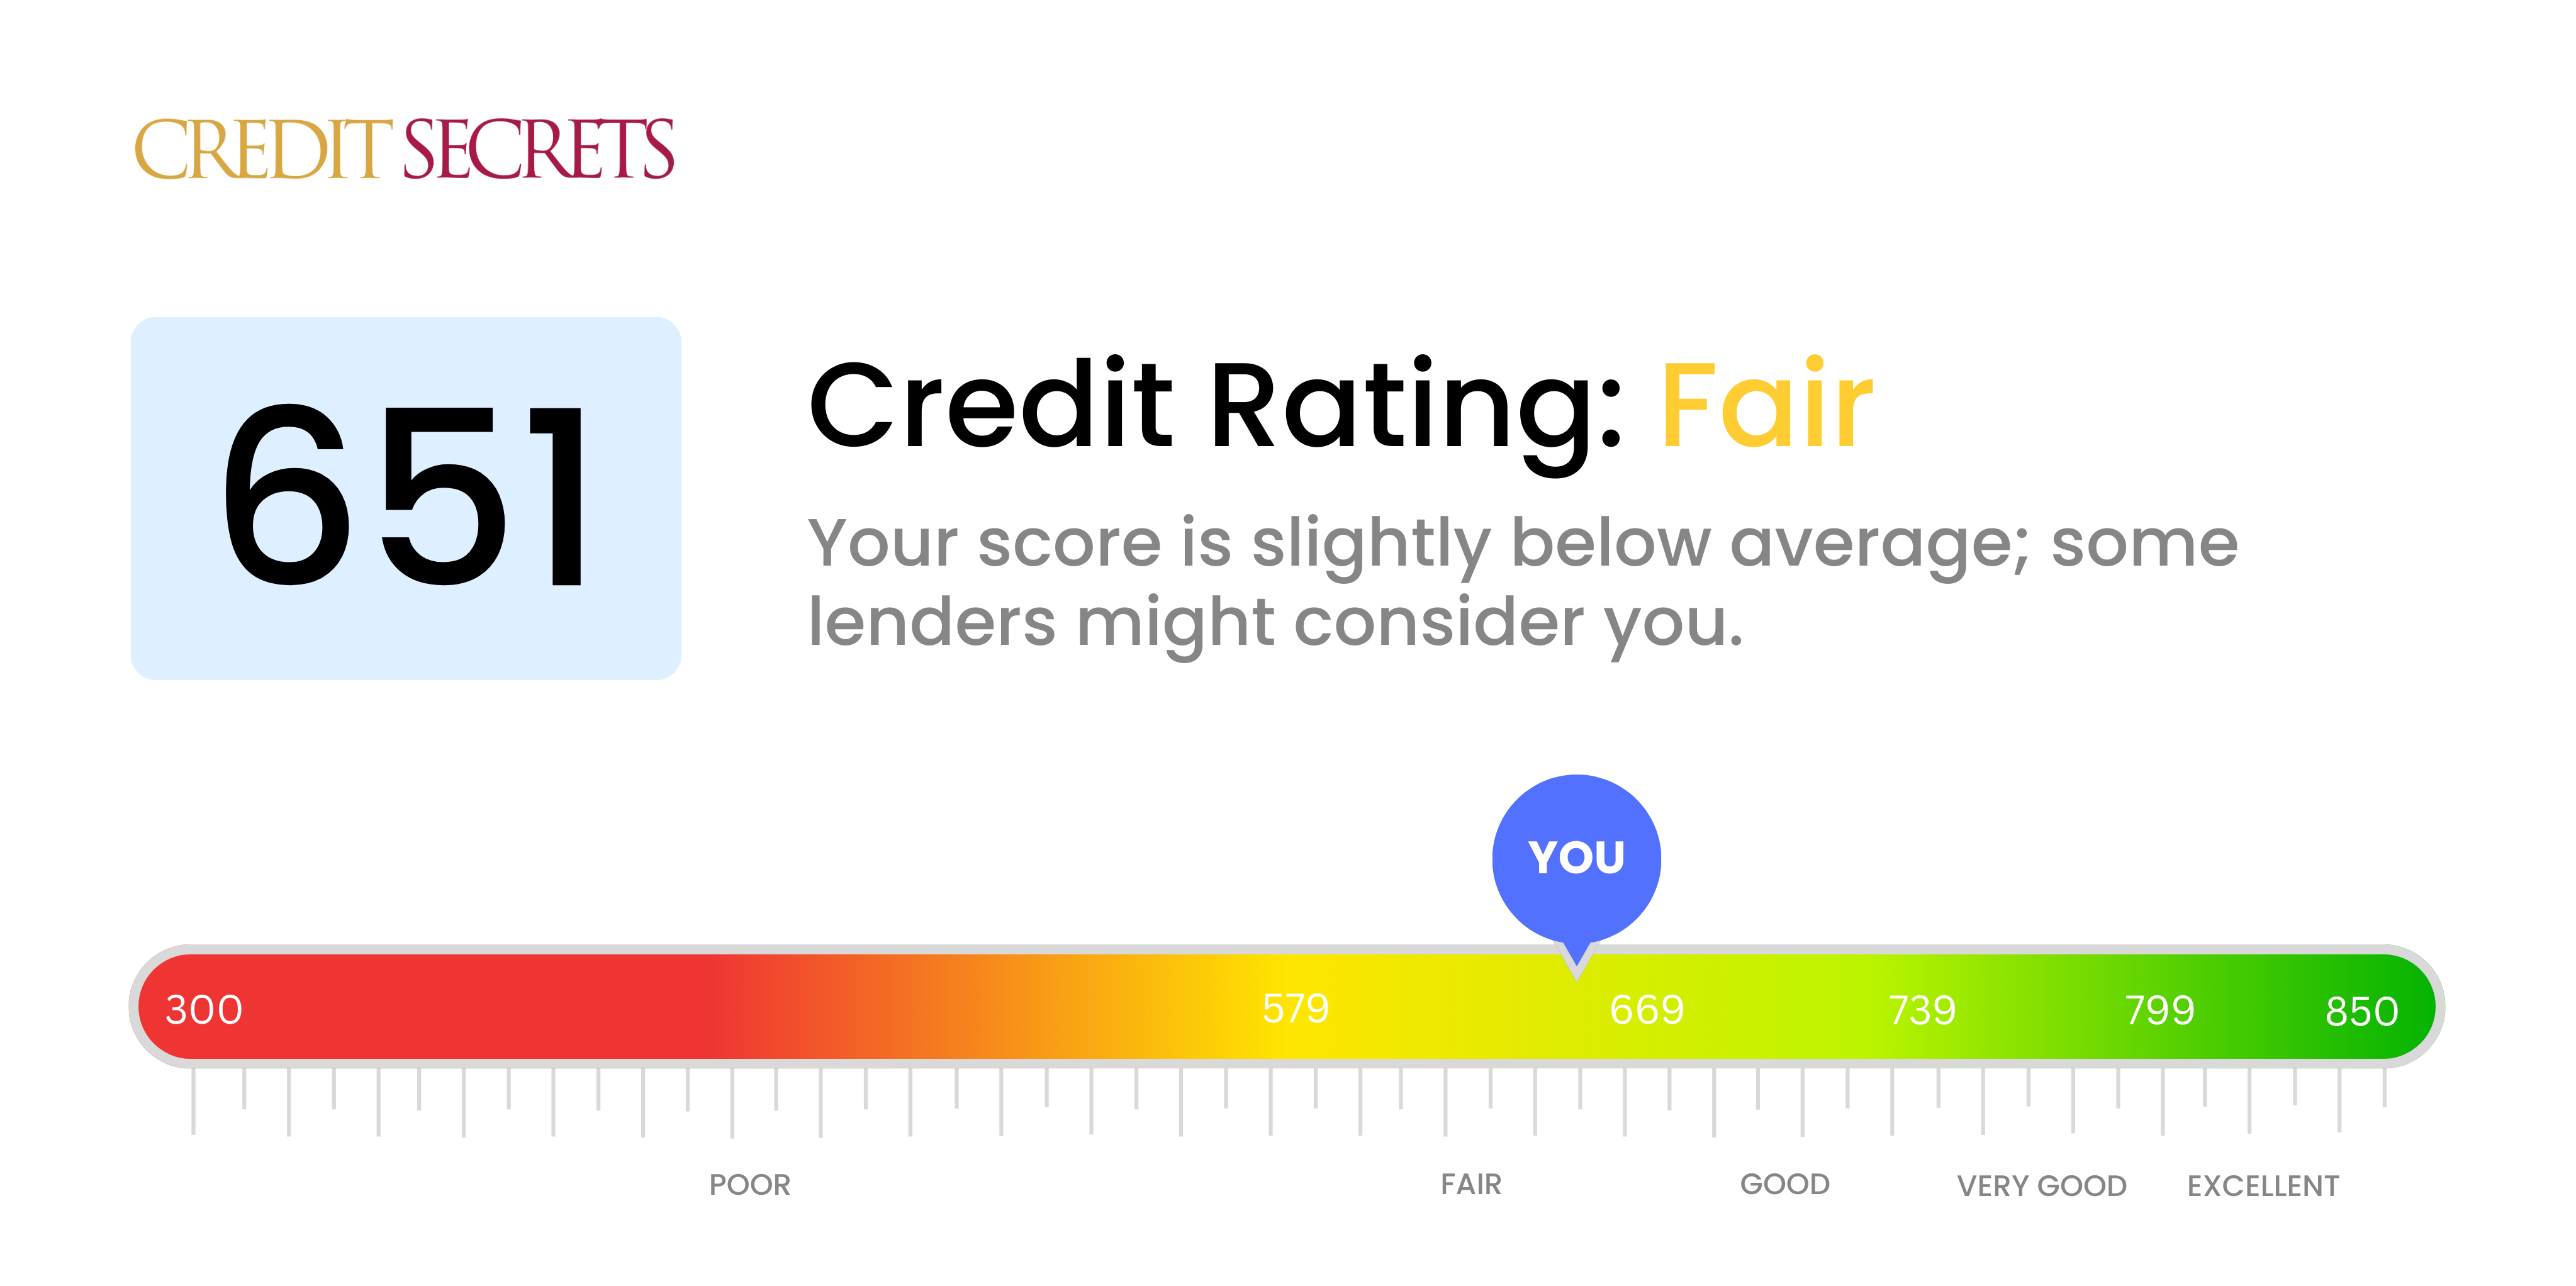 Is 651 a good credit score?